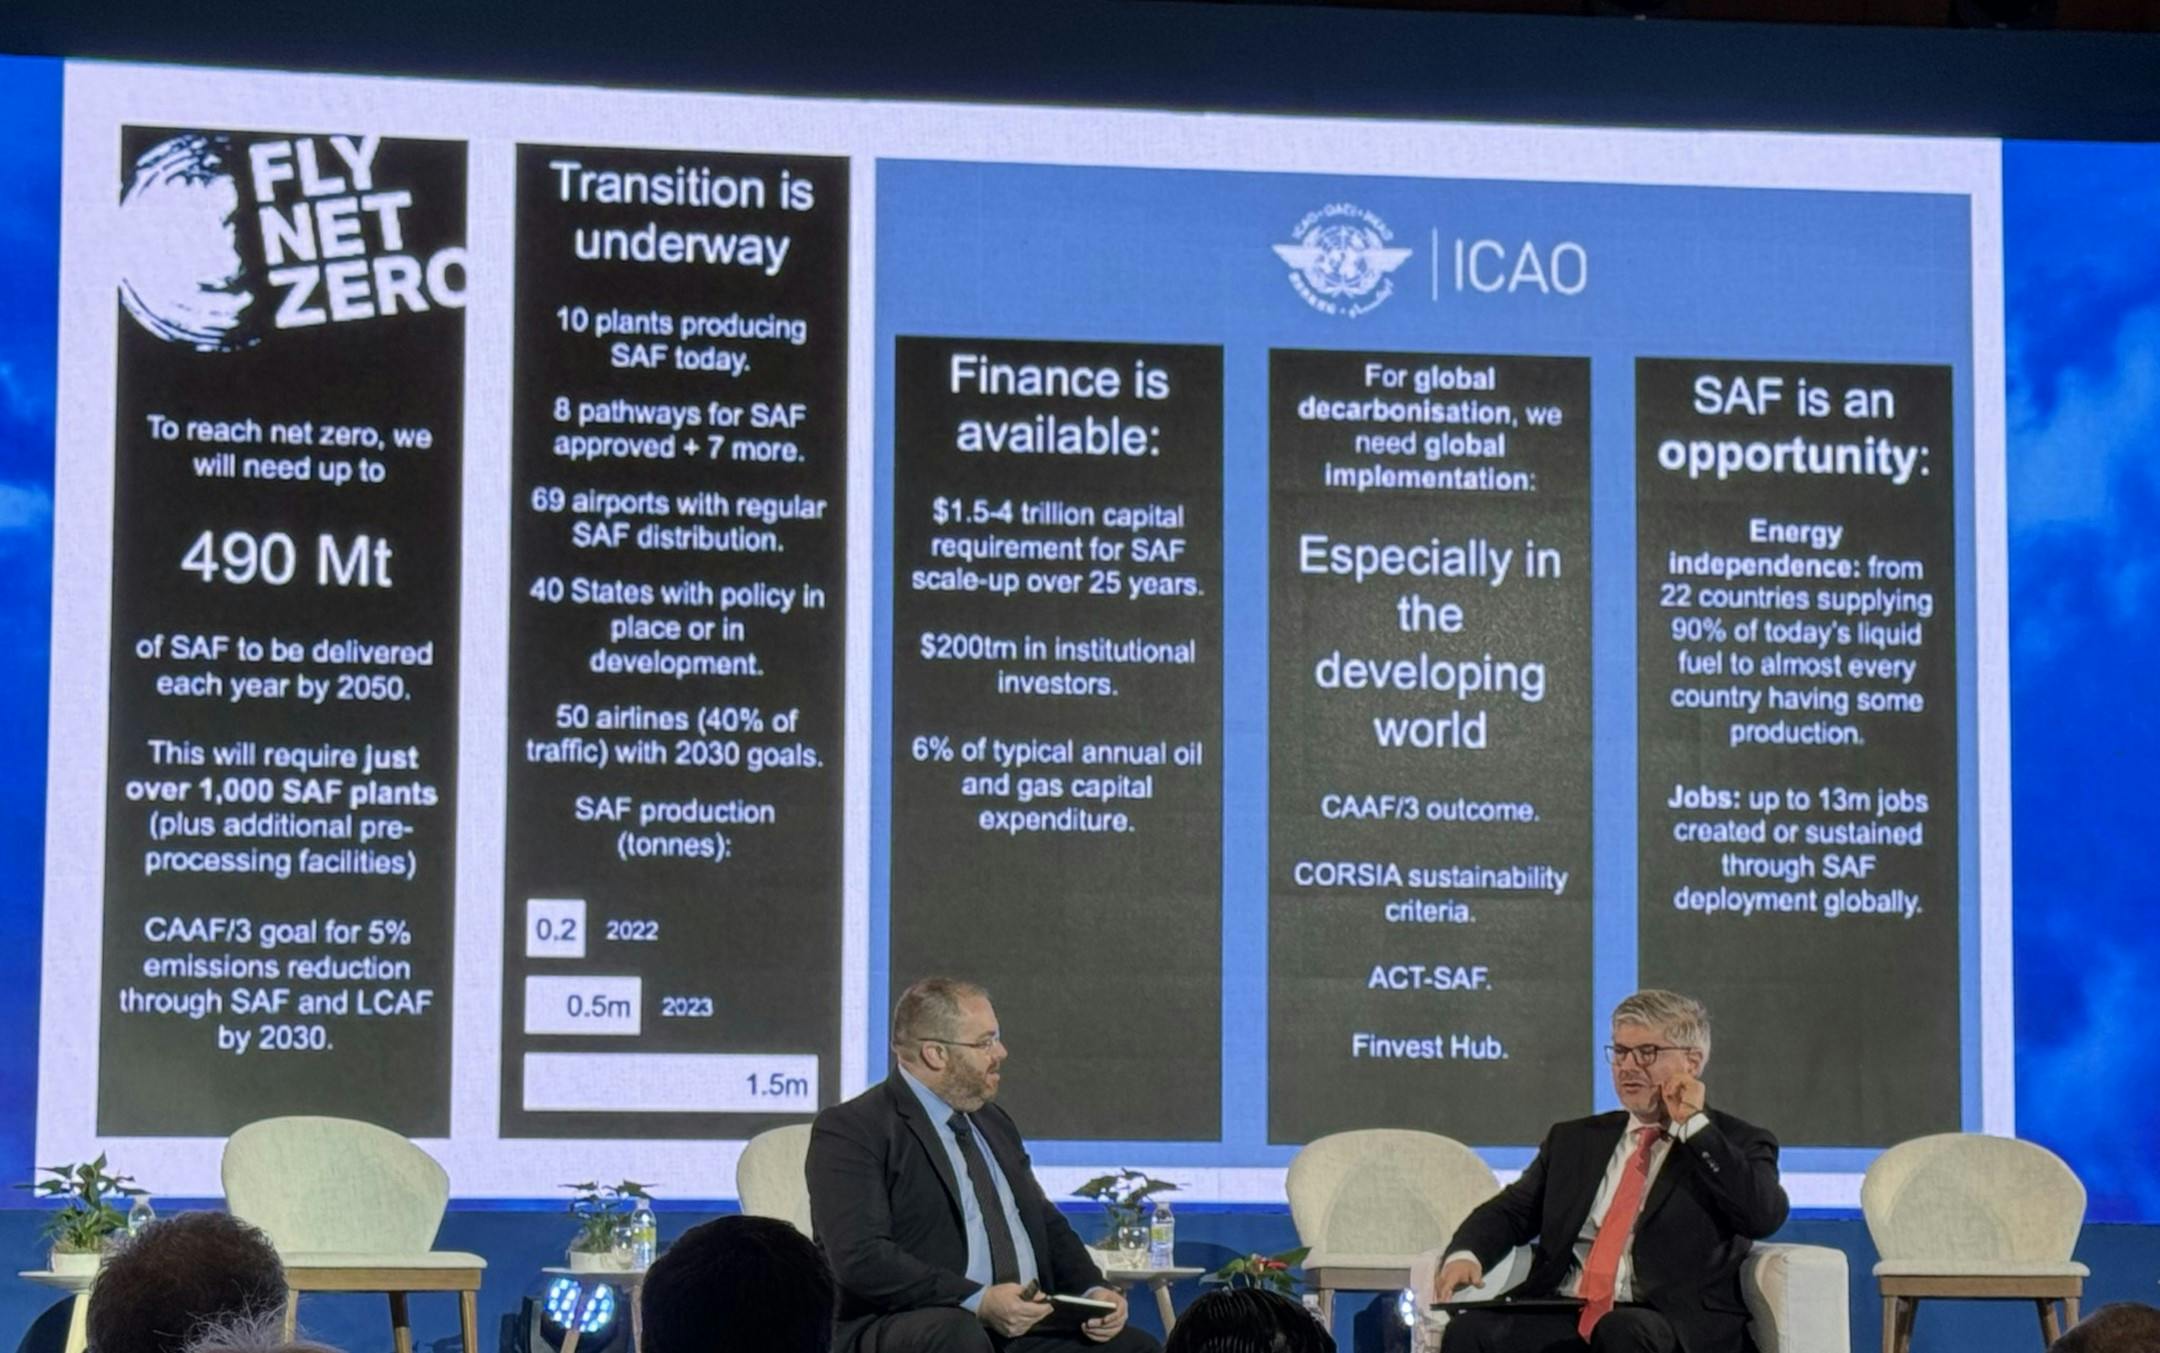 From left to right: Panel "A Deep Dive into the Strategic Architecture of ICAO’s Finvest Hub" with ICAO Executive Director, Mr Haldane Dodd, and Secretary General, Mr Juan Carlos Salazar. 